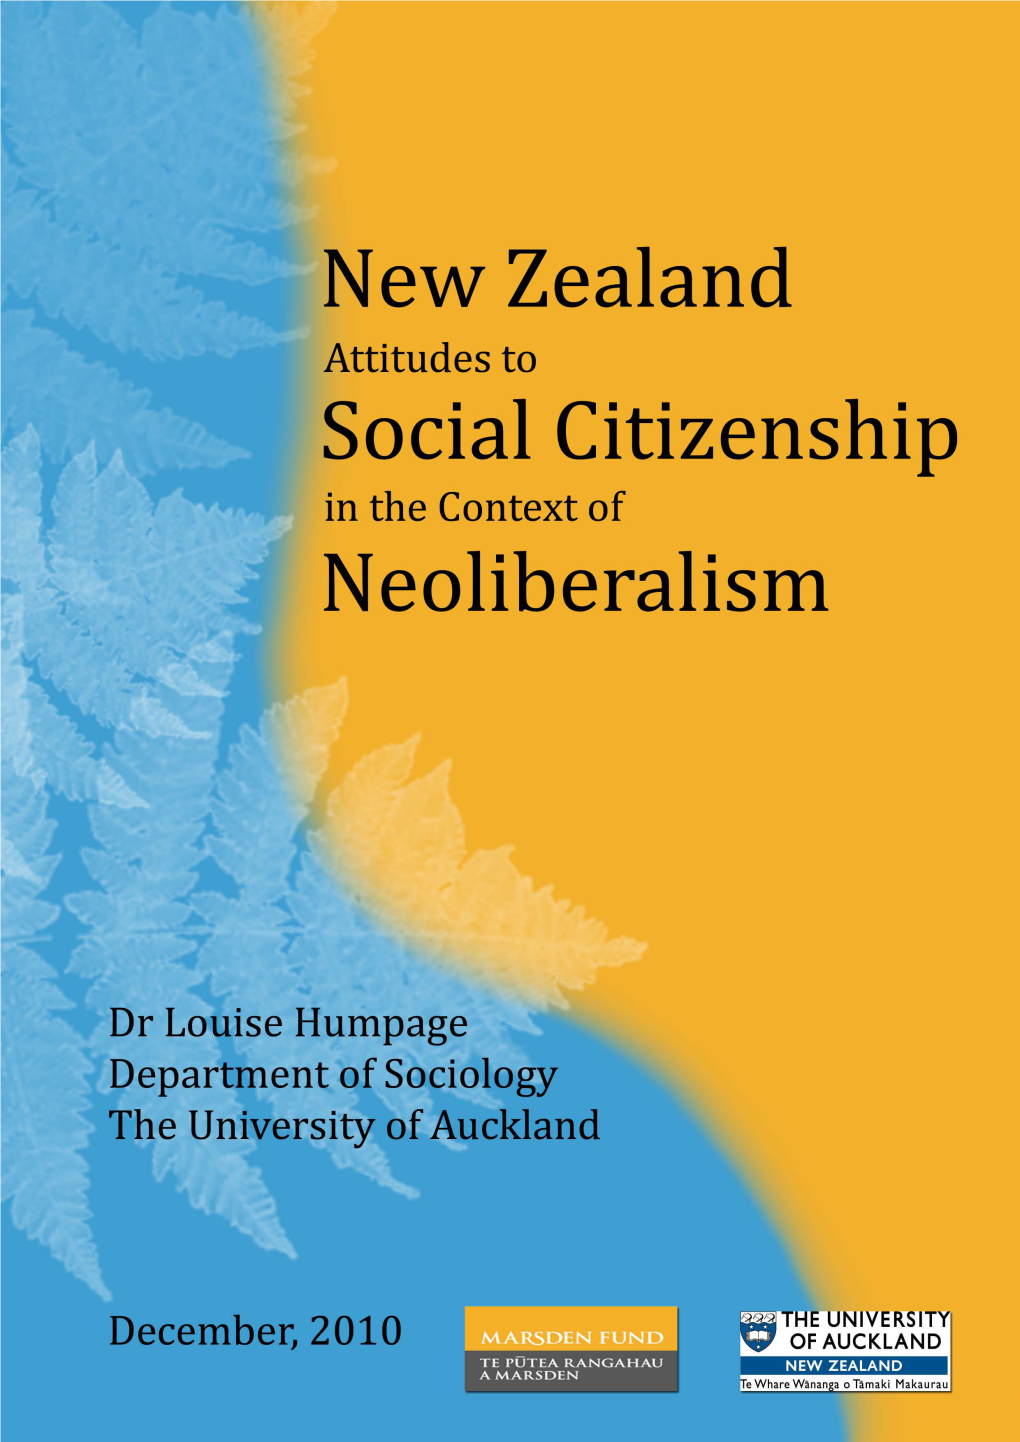 This Study Was Supported by the Royal Society of New Zealand Marsden Fund (06-UOA-133) and Published by the Department of Sociology, the University of Auckland